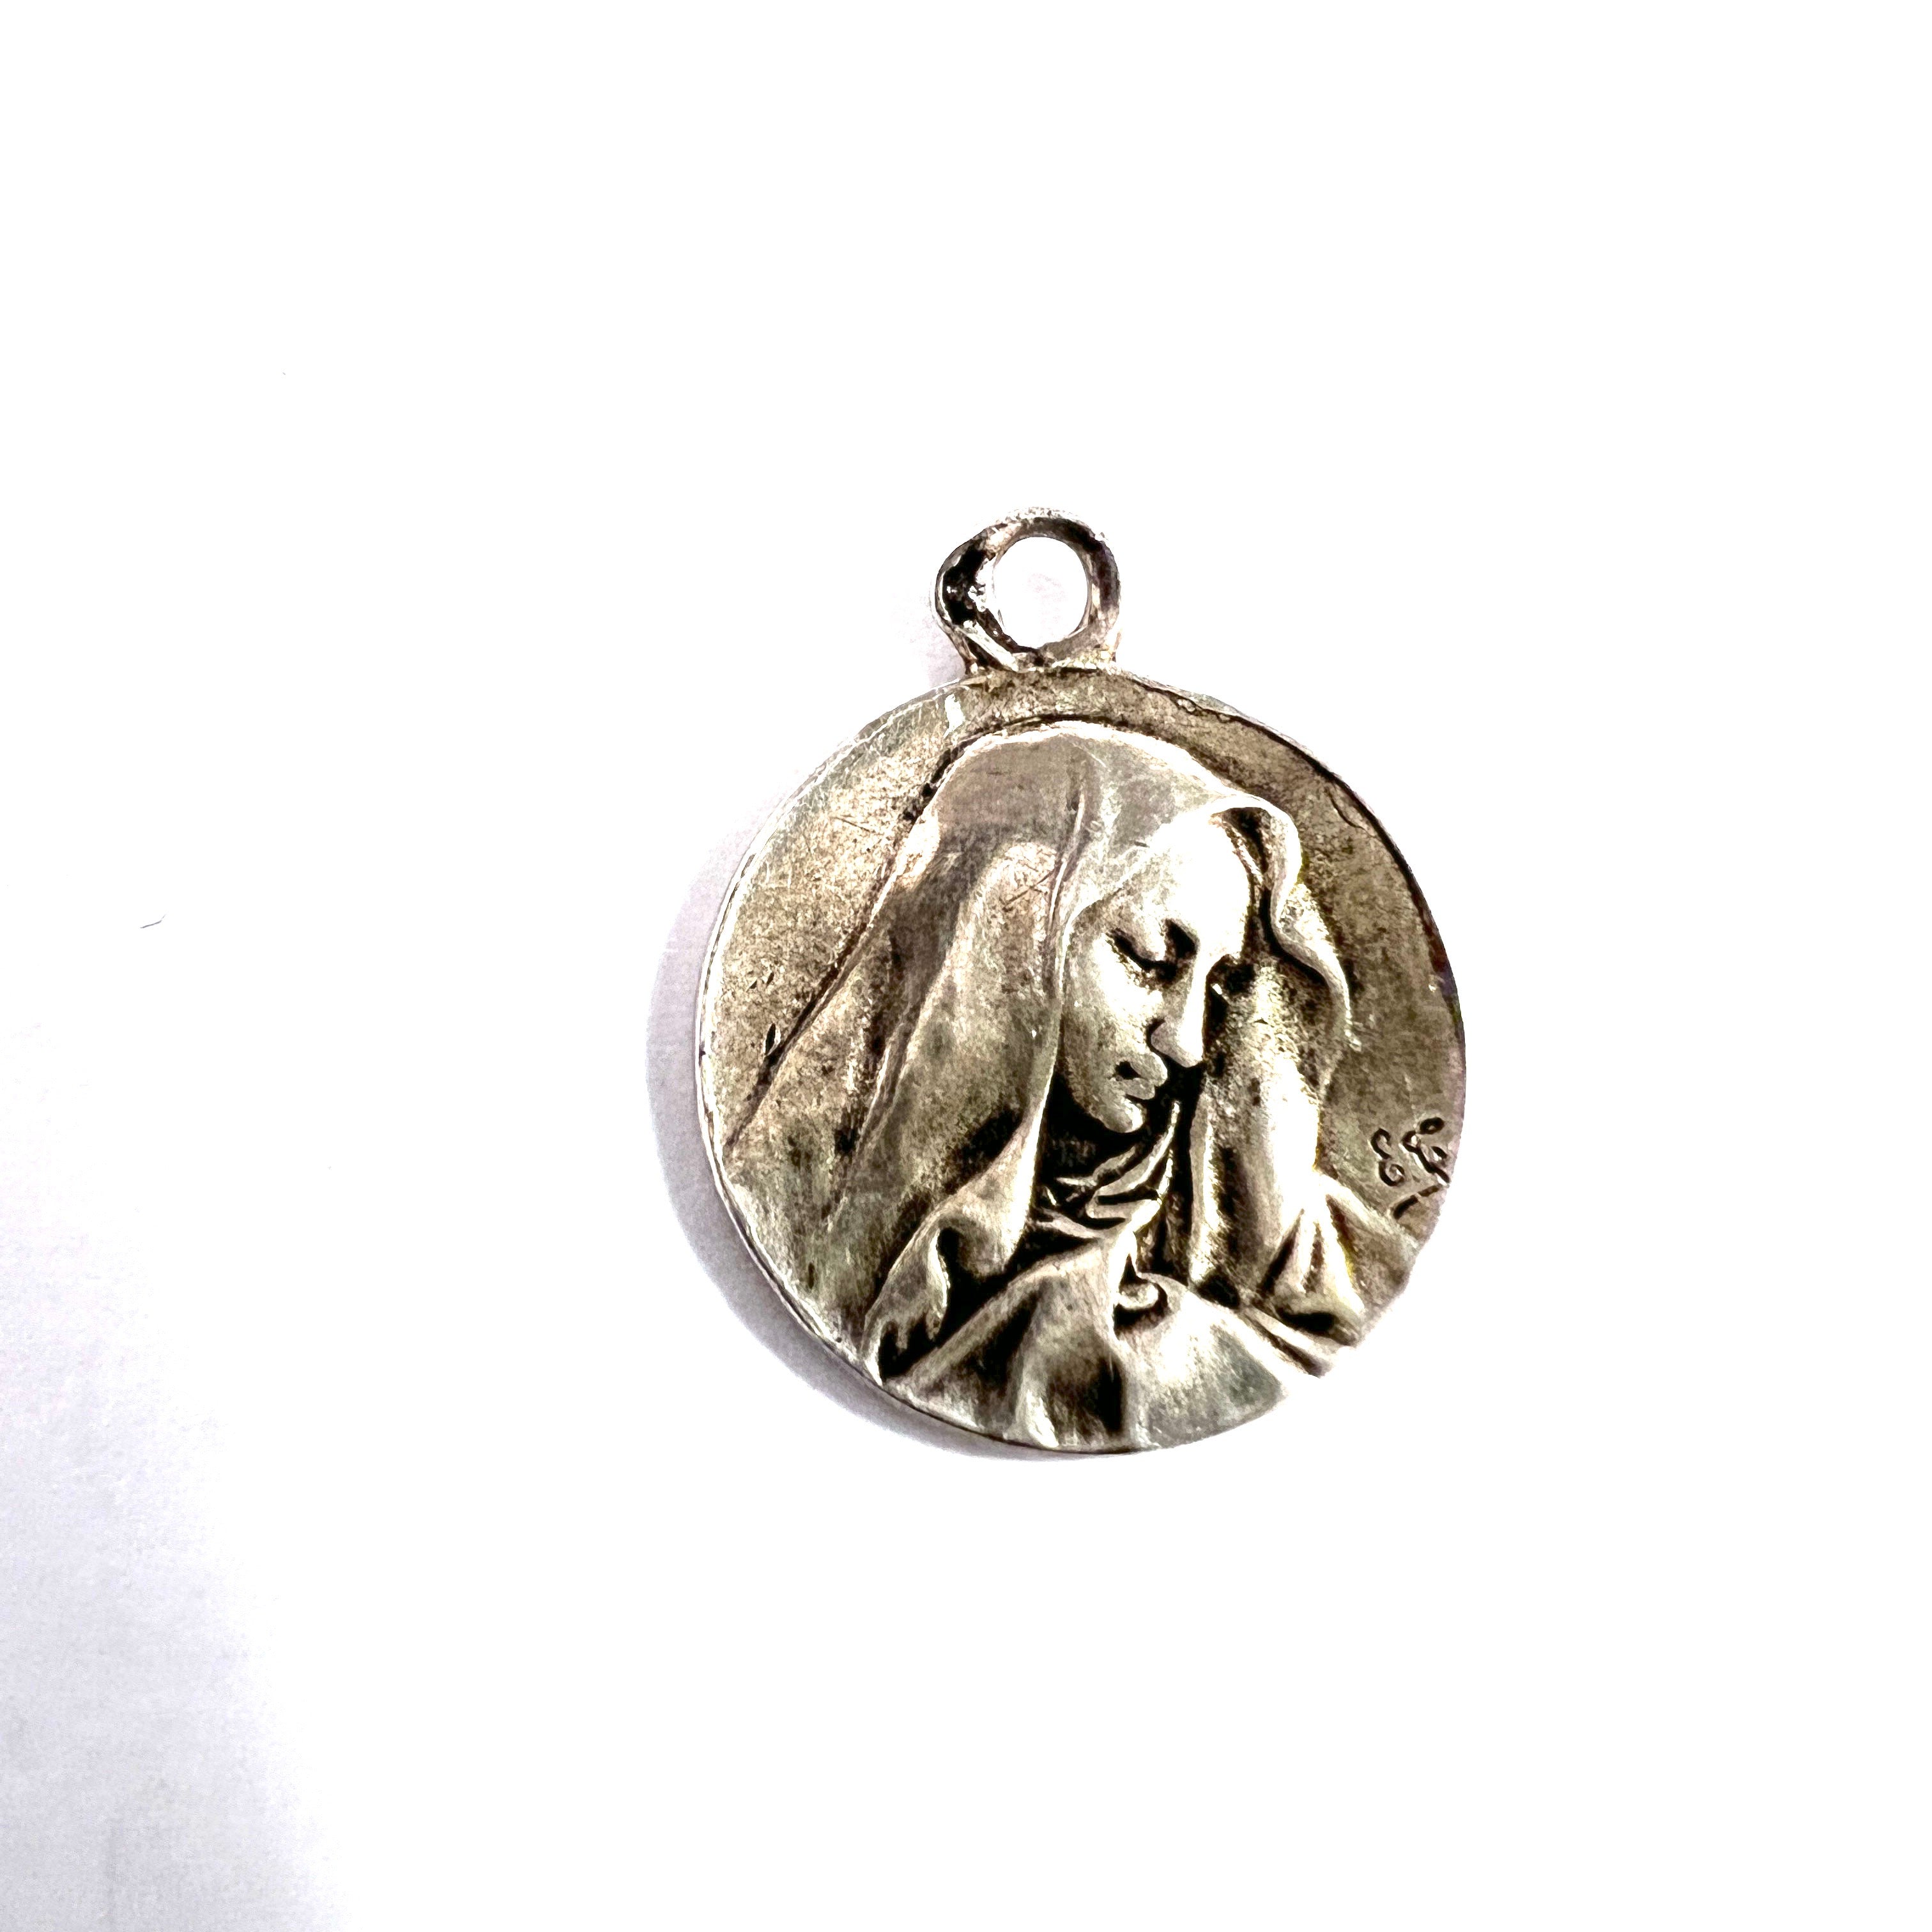 France Early 1900s. Solid Silver Madonna Charm. Signed.